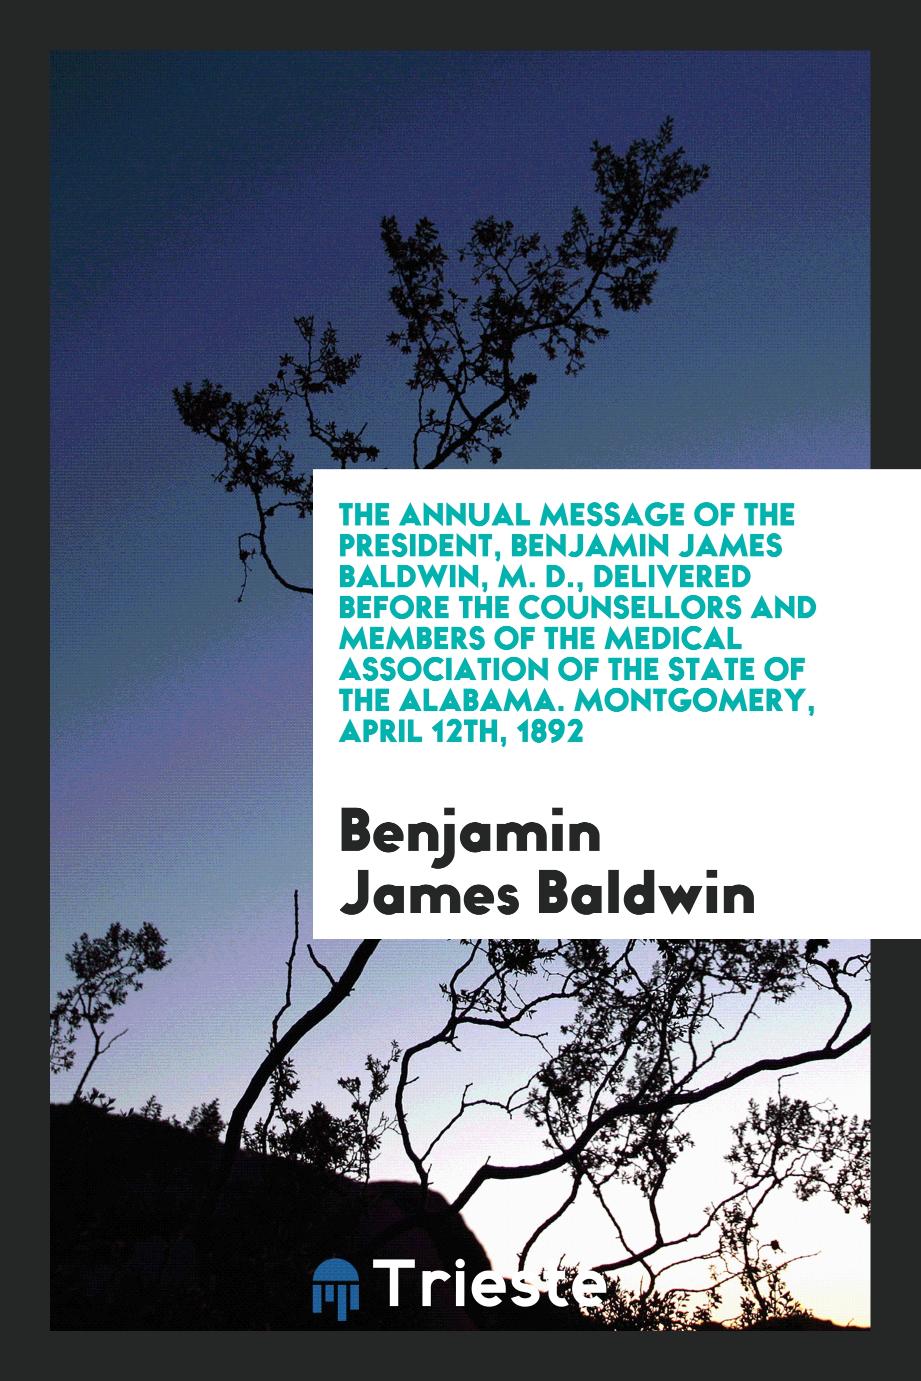 The Annual message of the president, Benjamin James Baldwin, M. D., delivered before the counsellors and members of the medical association of the State of the Alabama. Montgomery, april 12th, 1892